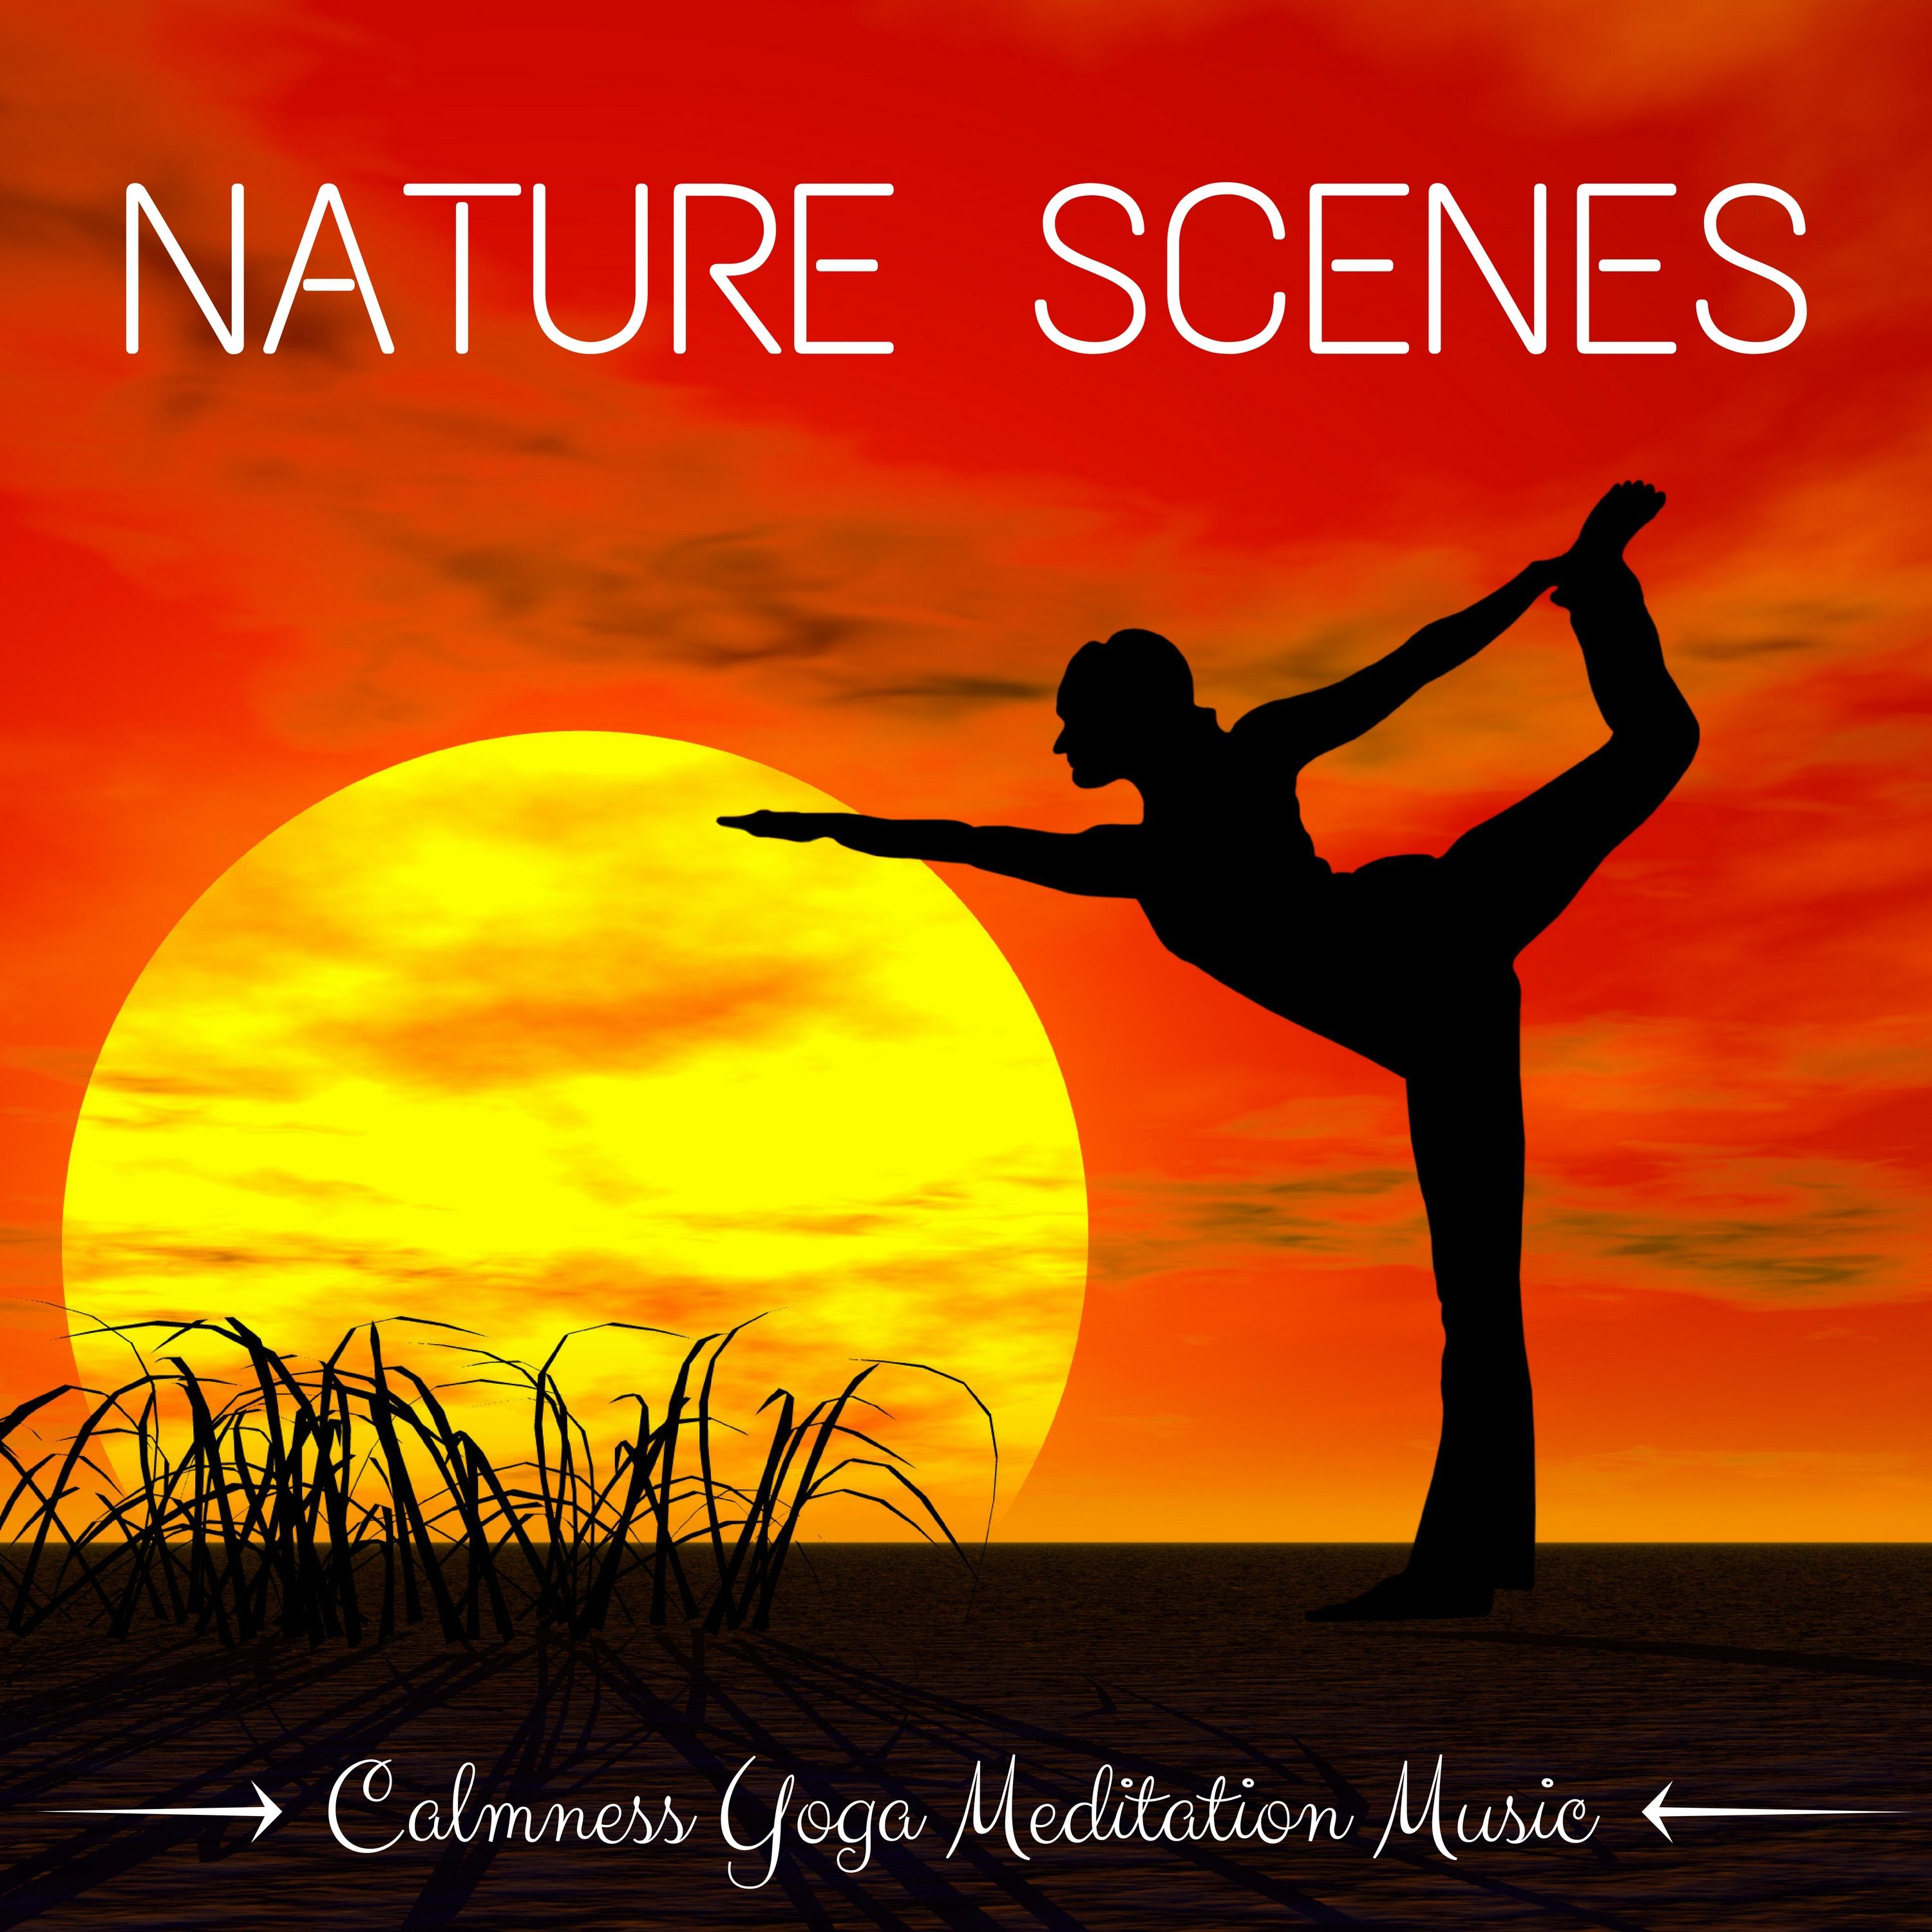 Nature Scenes: Calmness Yoga Meditation Music with Relaxing Ambient Instrumental Sounds